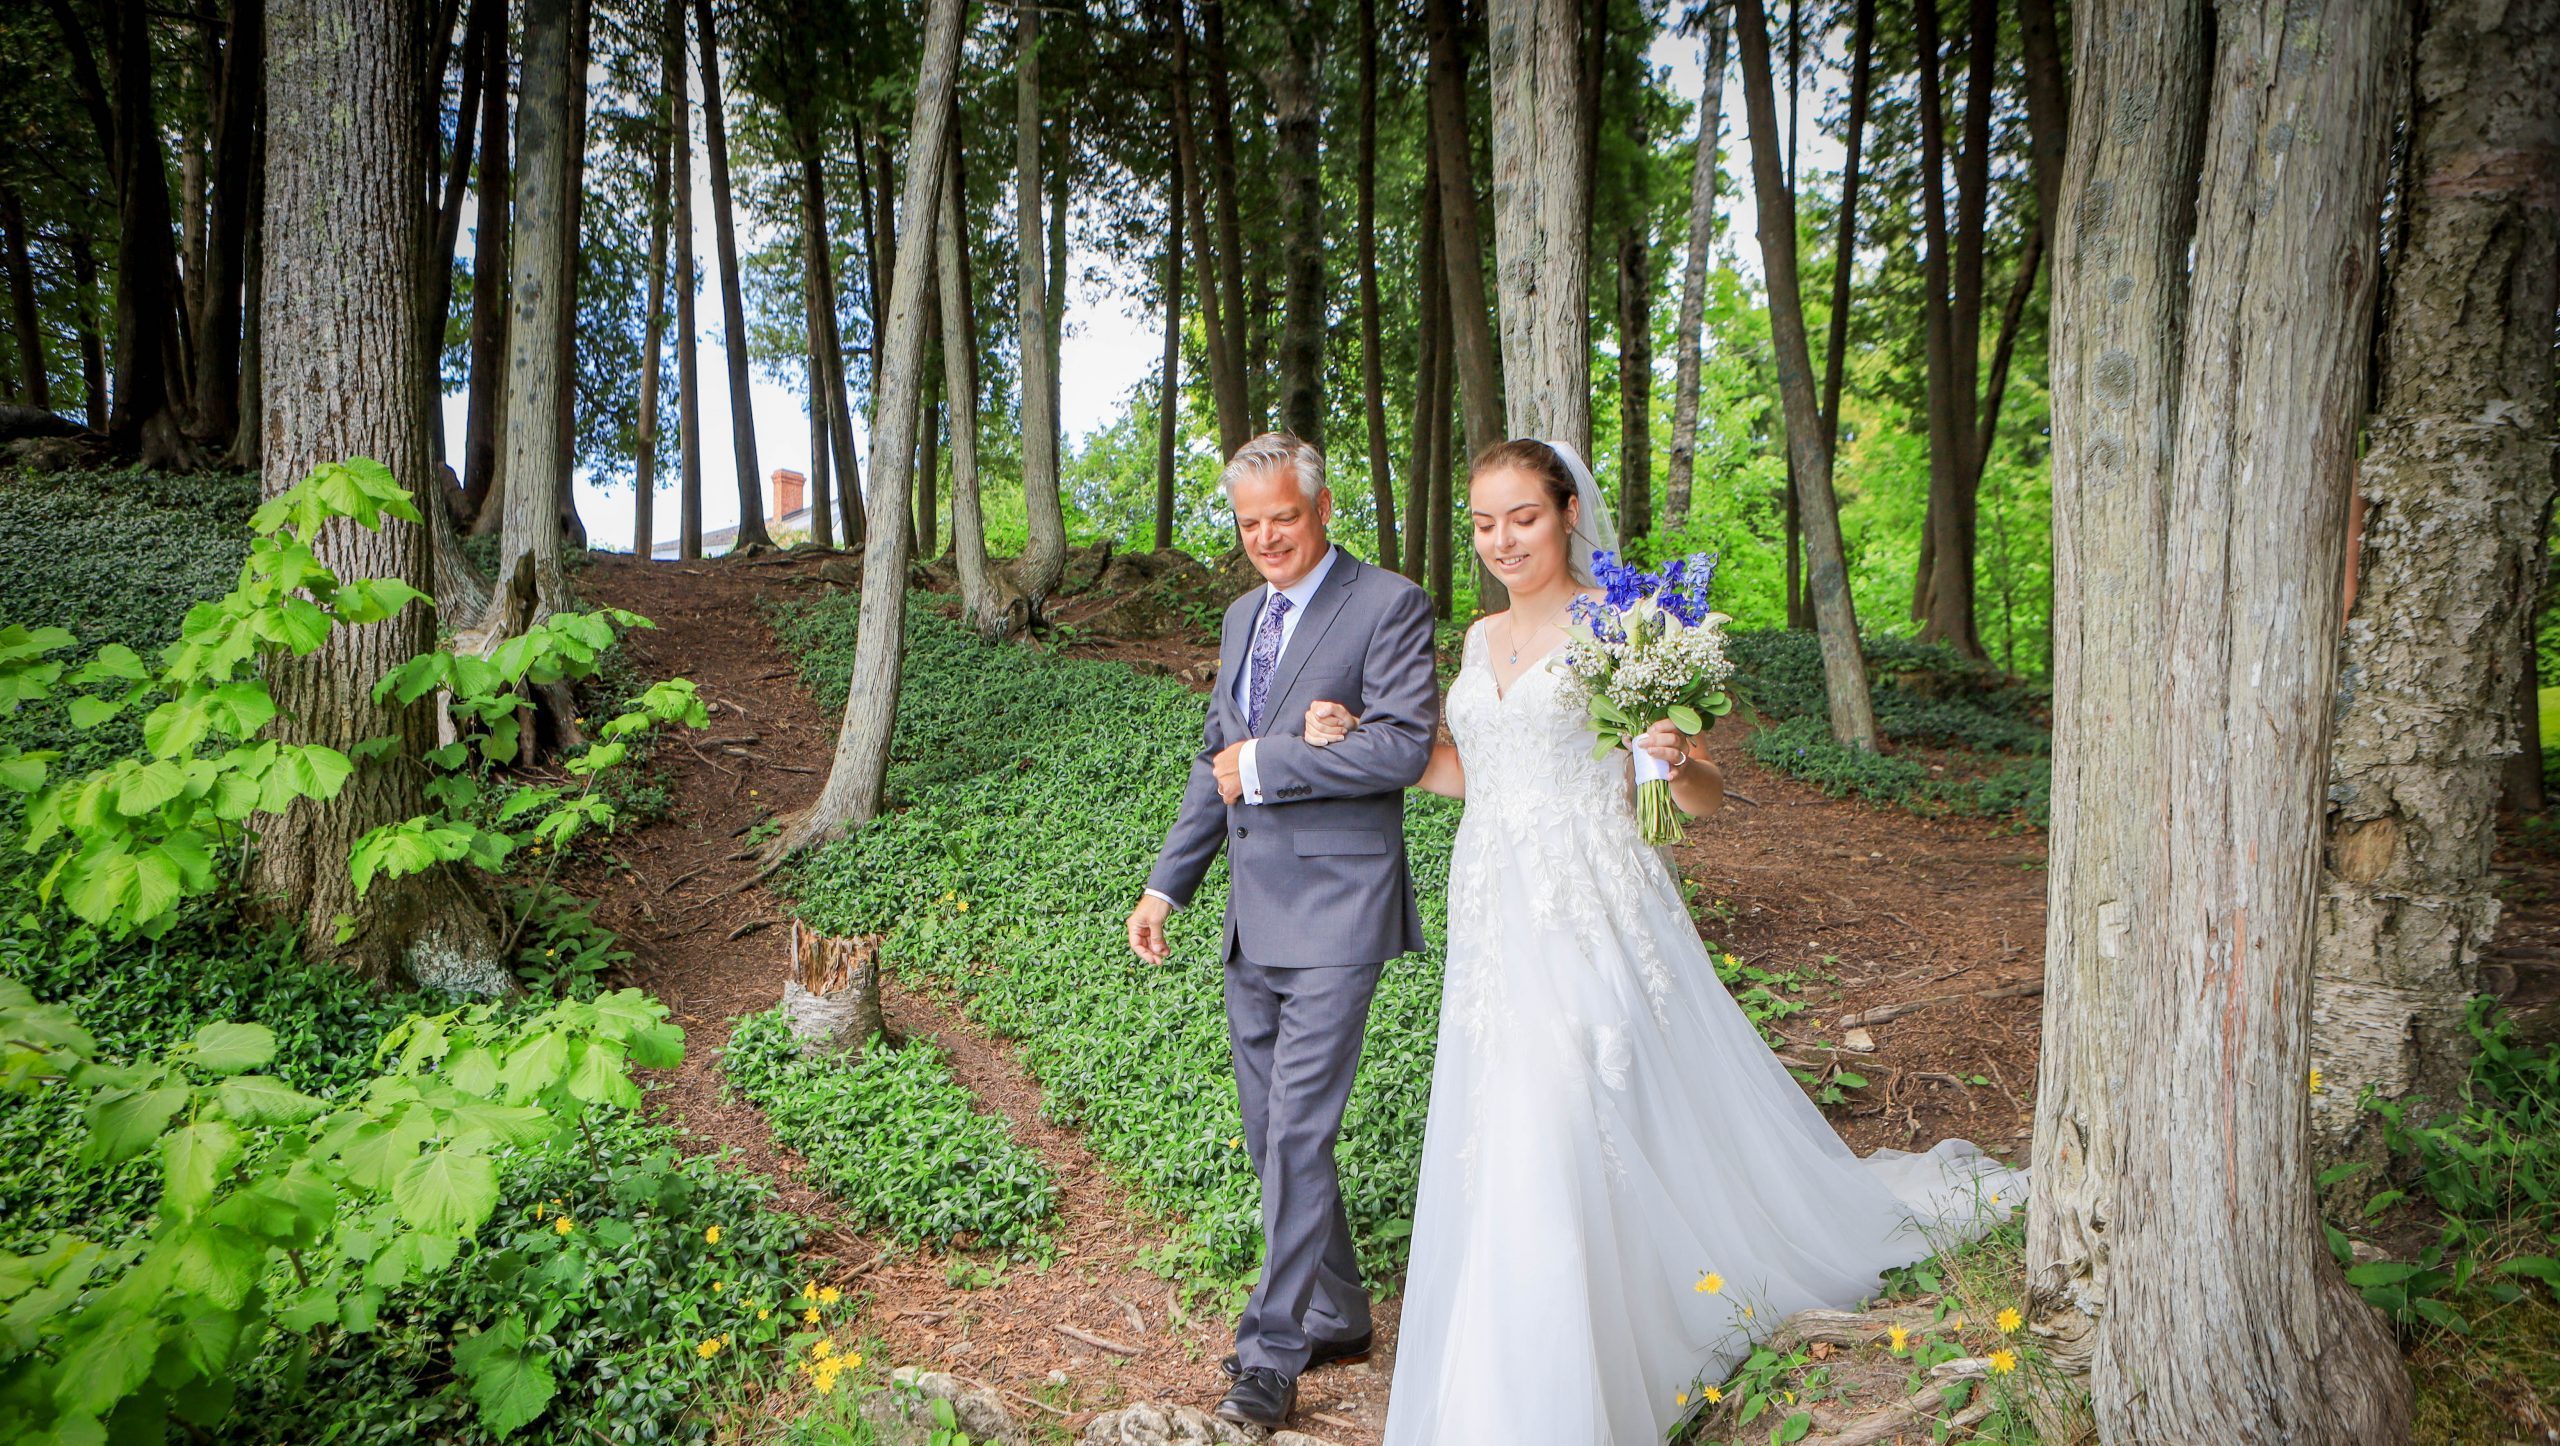 A bride and her father walk down the aisle through the woods at an outdoor wedding ceremony on Mackinac Island